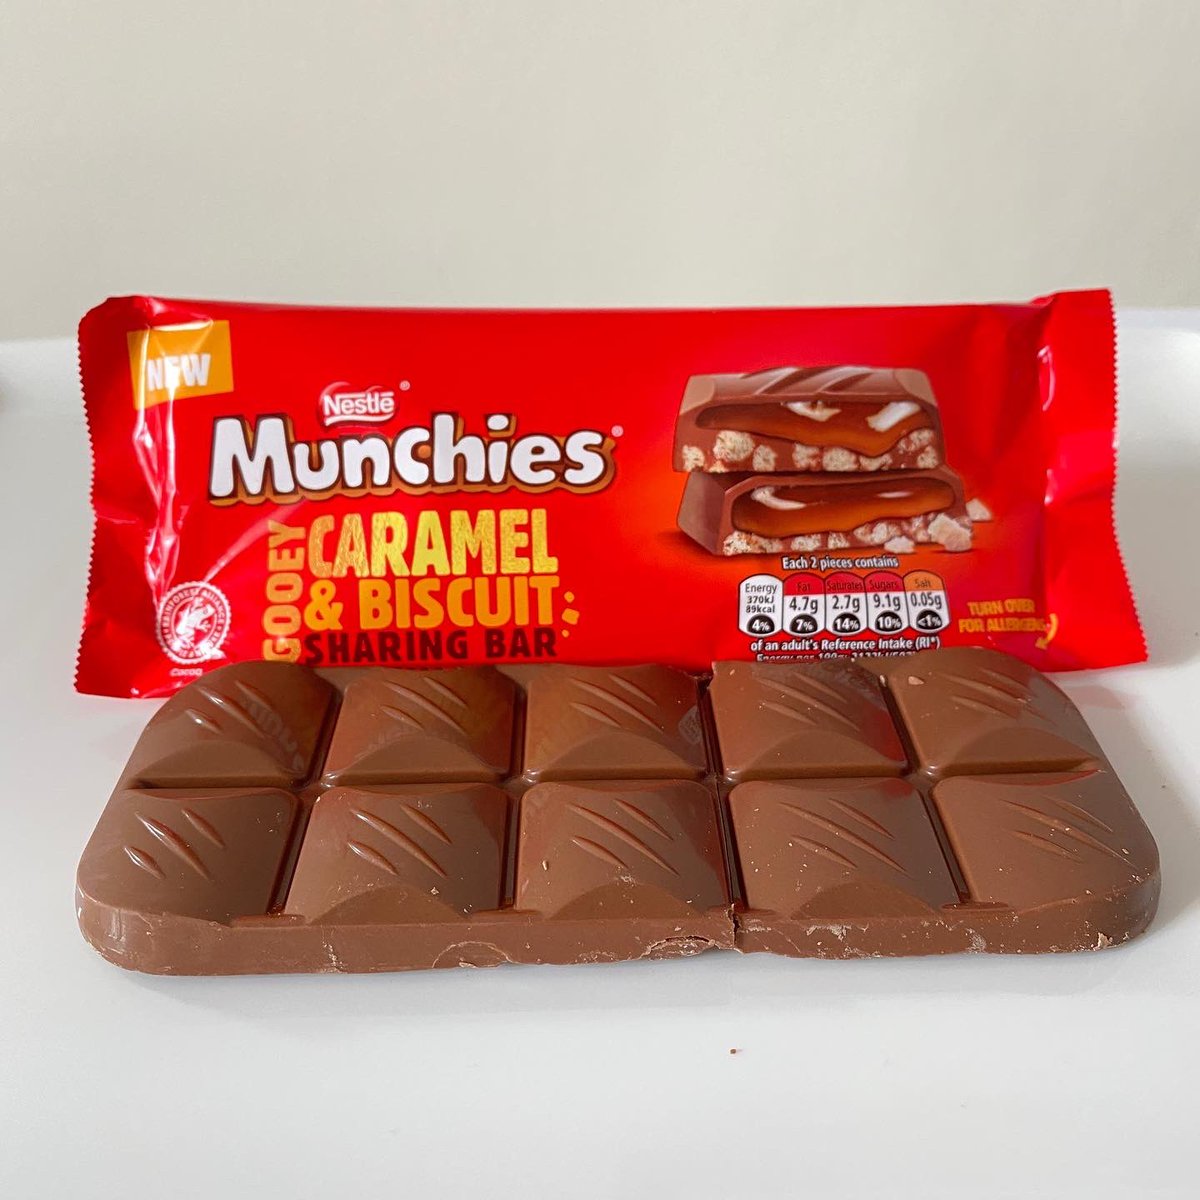 New Munchies Caramel & Biscuit Bar Review: instagram.com/p/Ch-NSC-rlR-/ #caramel #chocolate #review